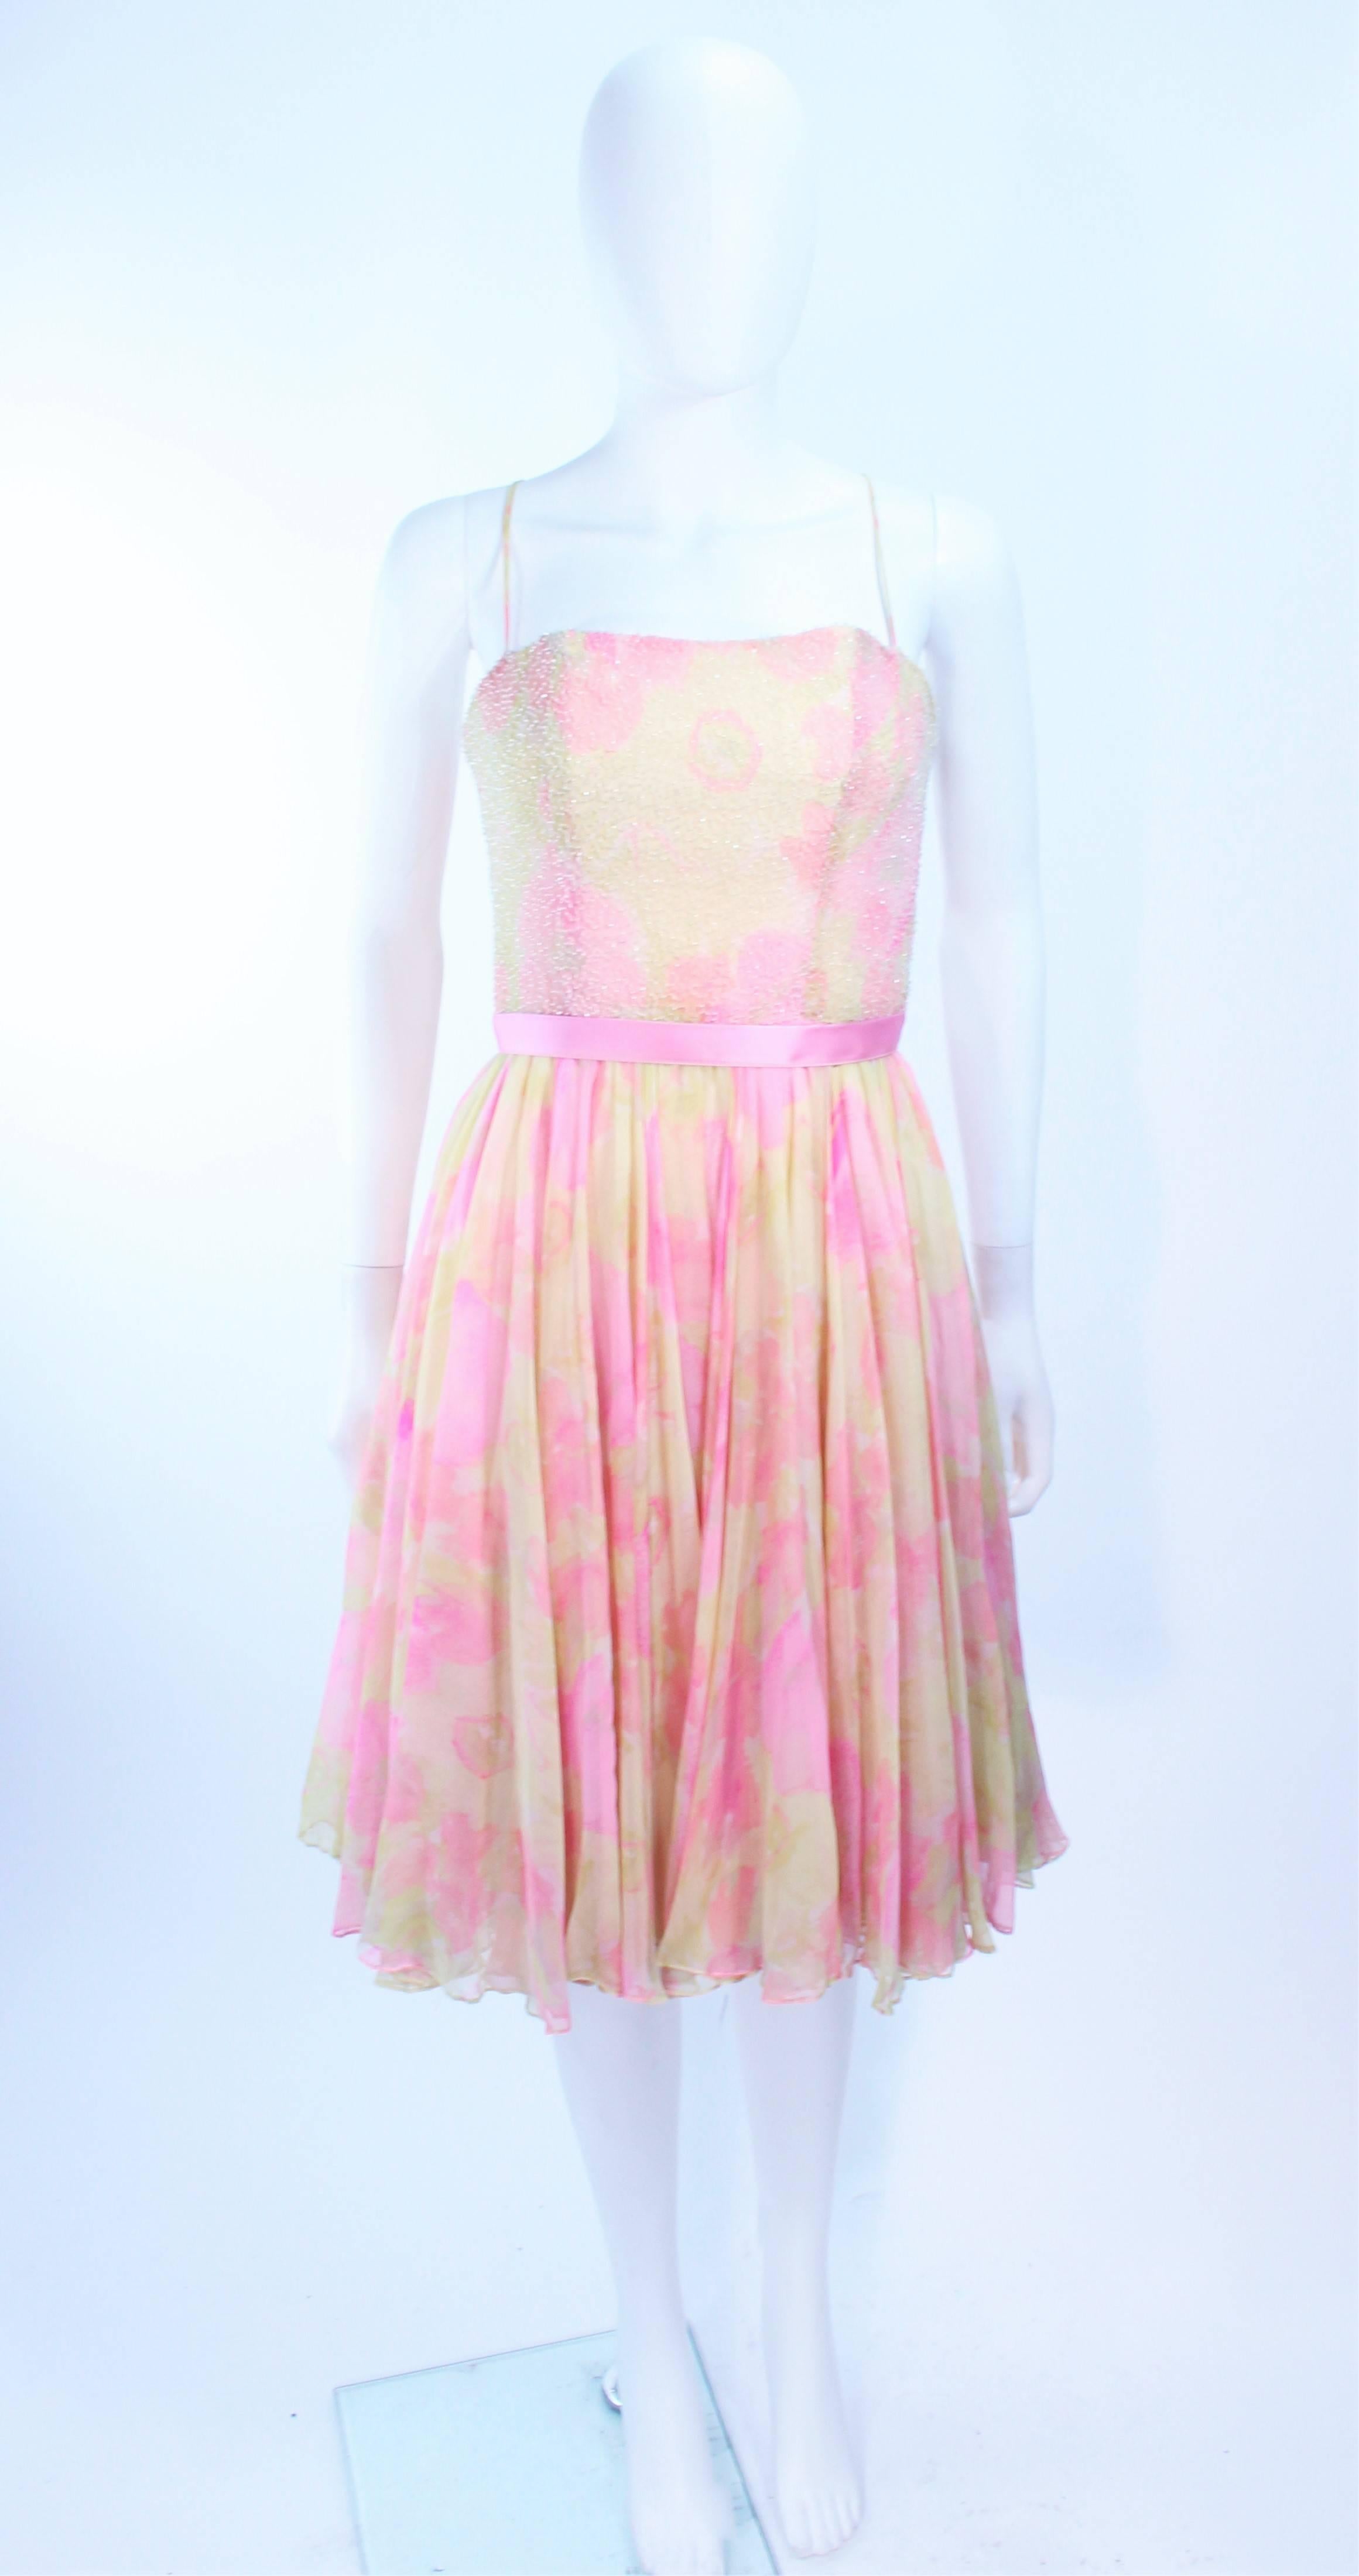 This Mildred cocktail dress is composed of a pink and yellow chiffon with floral pattern. Features a beaded bodice. There is a center back zipper closure, with satin belt. In excellent vintage condition.

**Please cross-reference measurements for